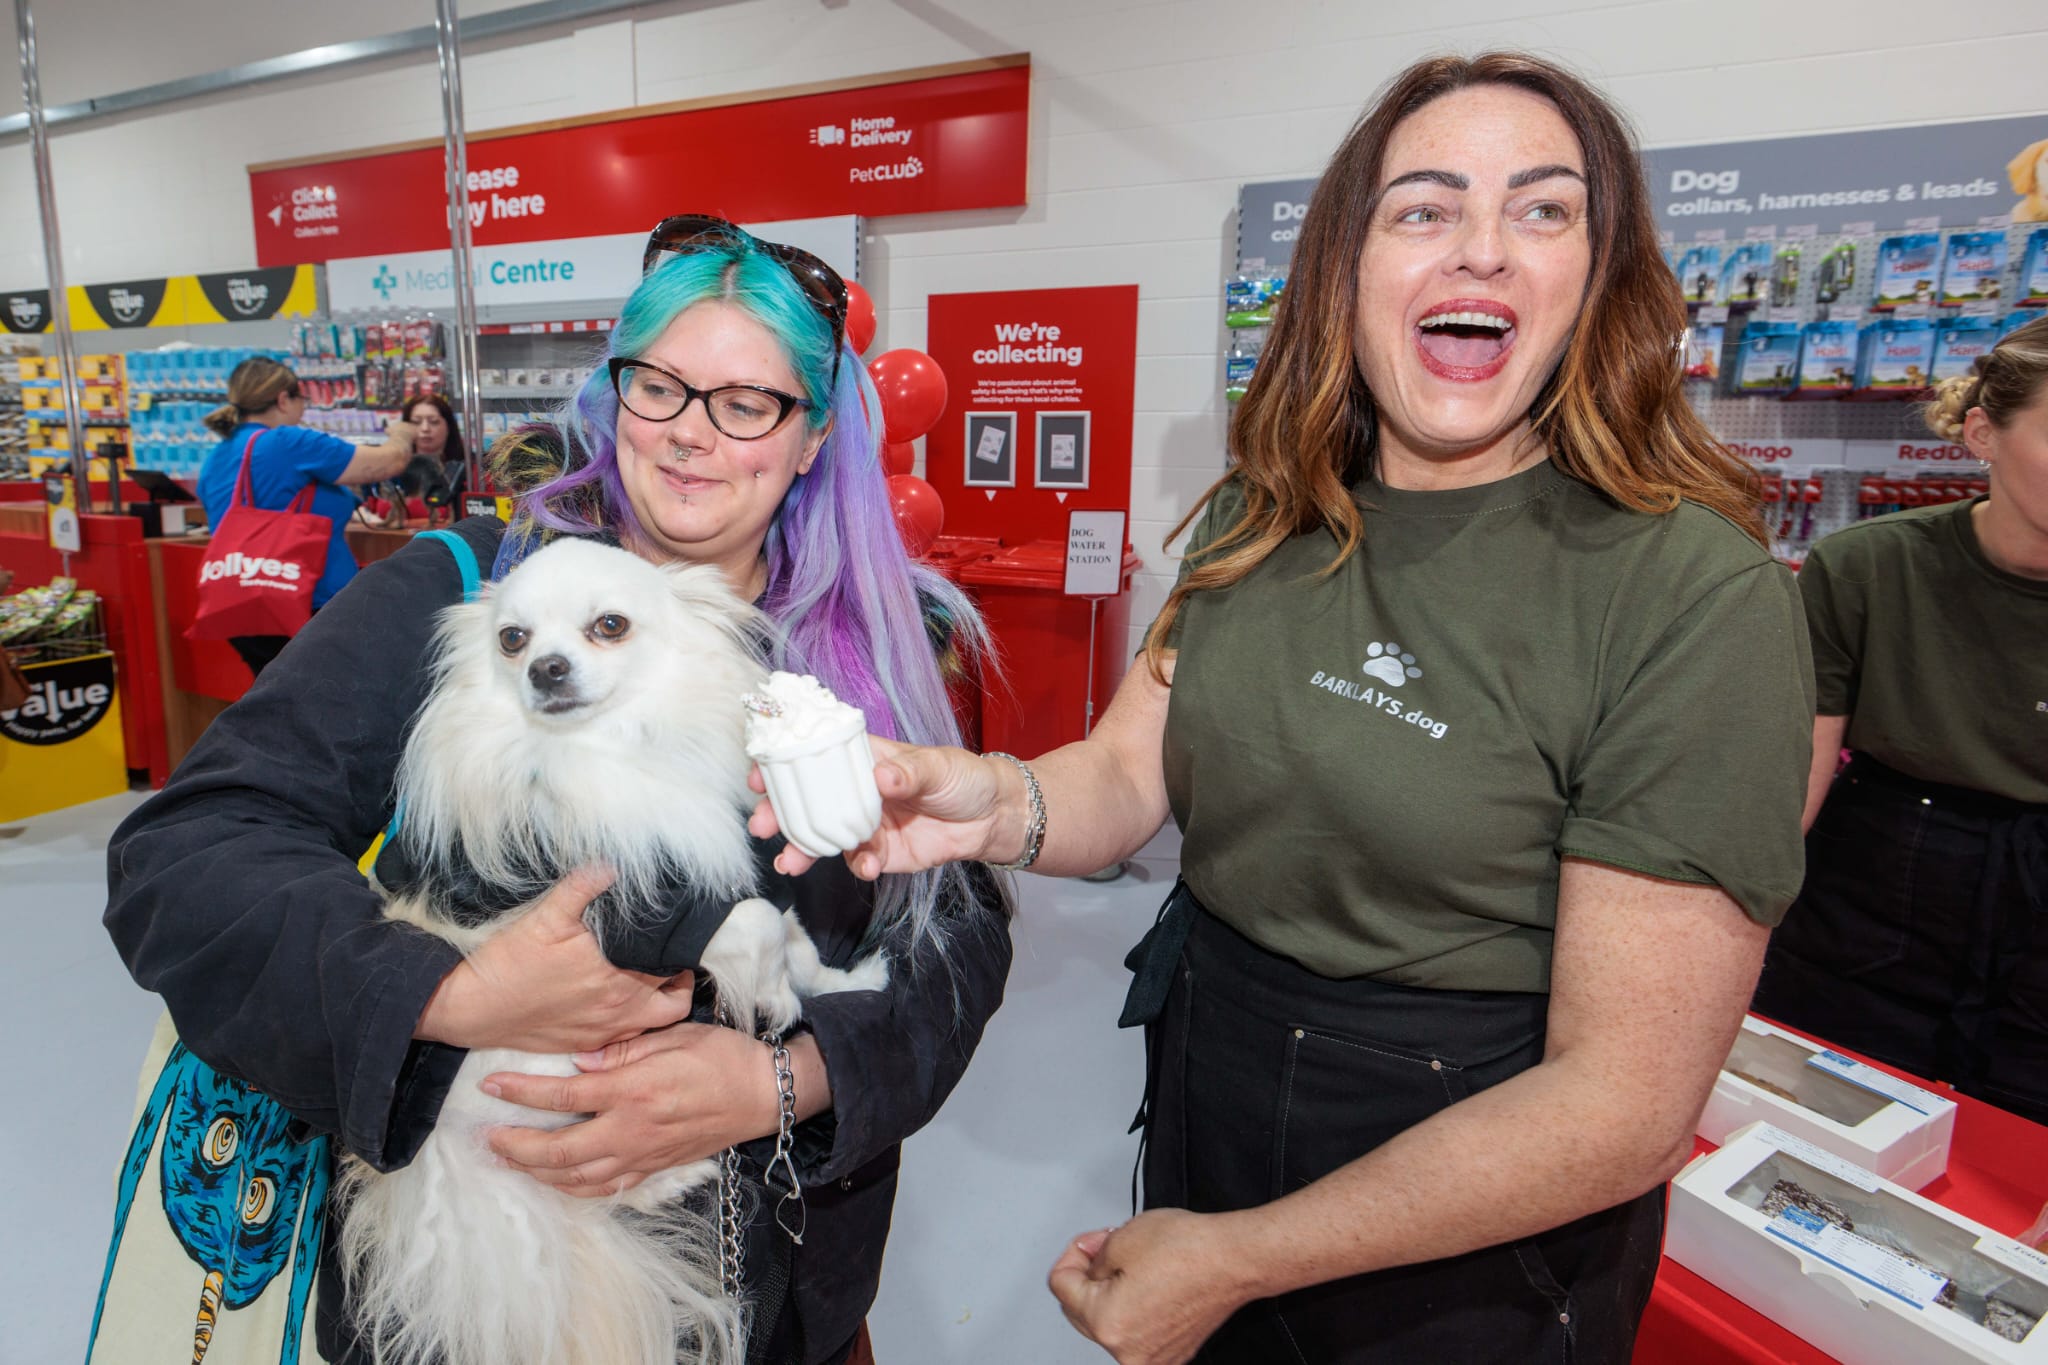 The new Jollyes pet store has opened at Kew Retail Park in Southport. Pet owners and their pets were treated to free puppachinos from Lesley Morgan-Macbain (right), owner of Churchtown dog-friendly café Barklays